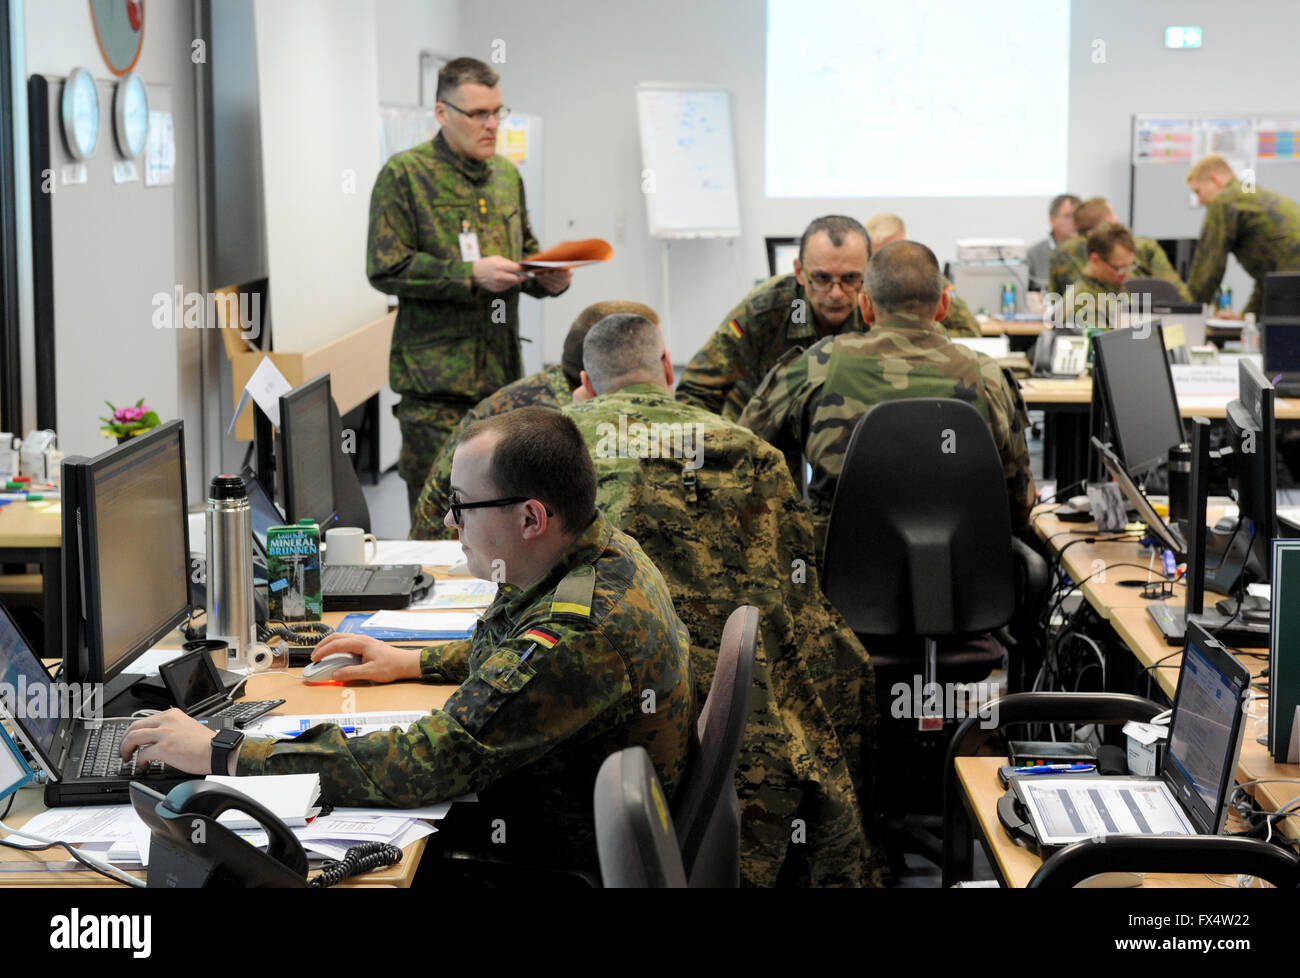 Garlstedt, Germany. 11th Apr, 2016. Soldiers from several countries use computers to plan the deployment of troops in a hall of the logistics school of the German armed forces in Garlstedt, Germany, 11 April 2016. The actual exercise is to be held on the sea and in the air in northwestern Germany until 22 April. Some 2,000 soldiers from 12 countries are taking part in the 'Joint Derby 16' large-scale exercise. Photo: INGO WAGNER/dpa/Alamy Live News Stock Photo